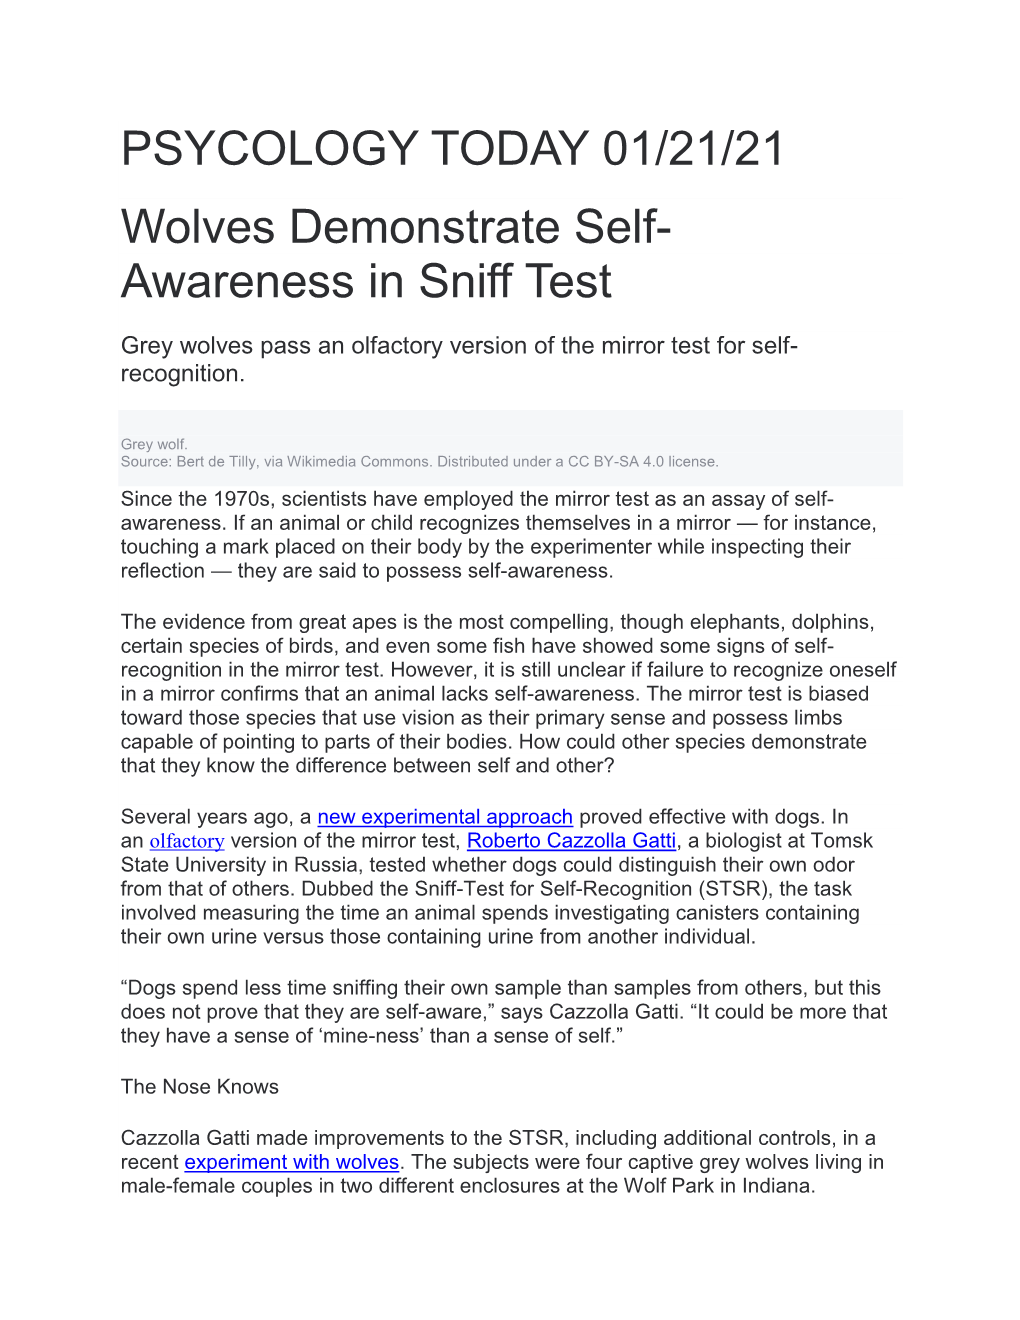 PSYCOLOGY TODAY 01/21/21 Wolves Demonstrate Self- Awareness in Sniff Test